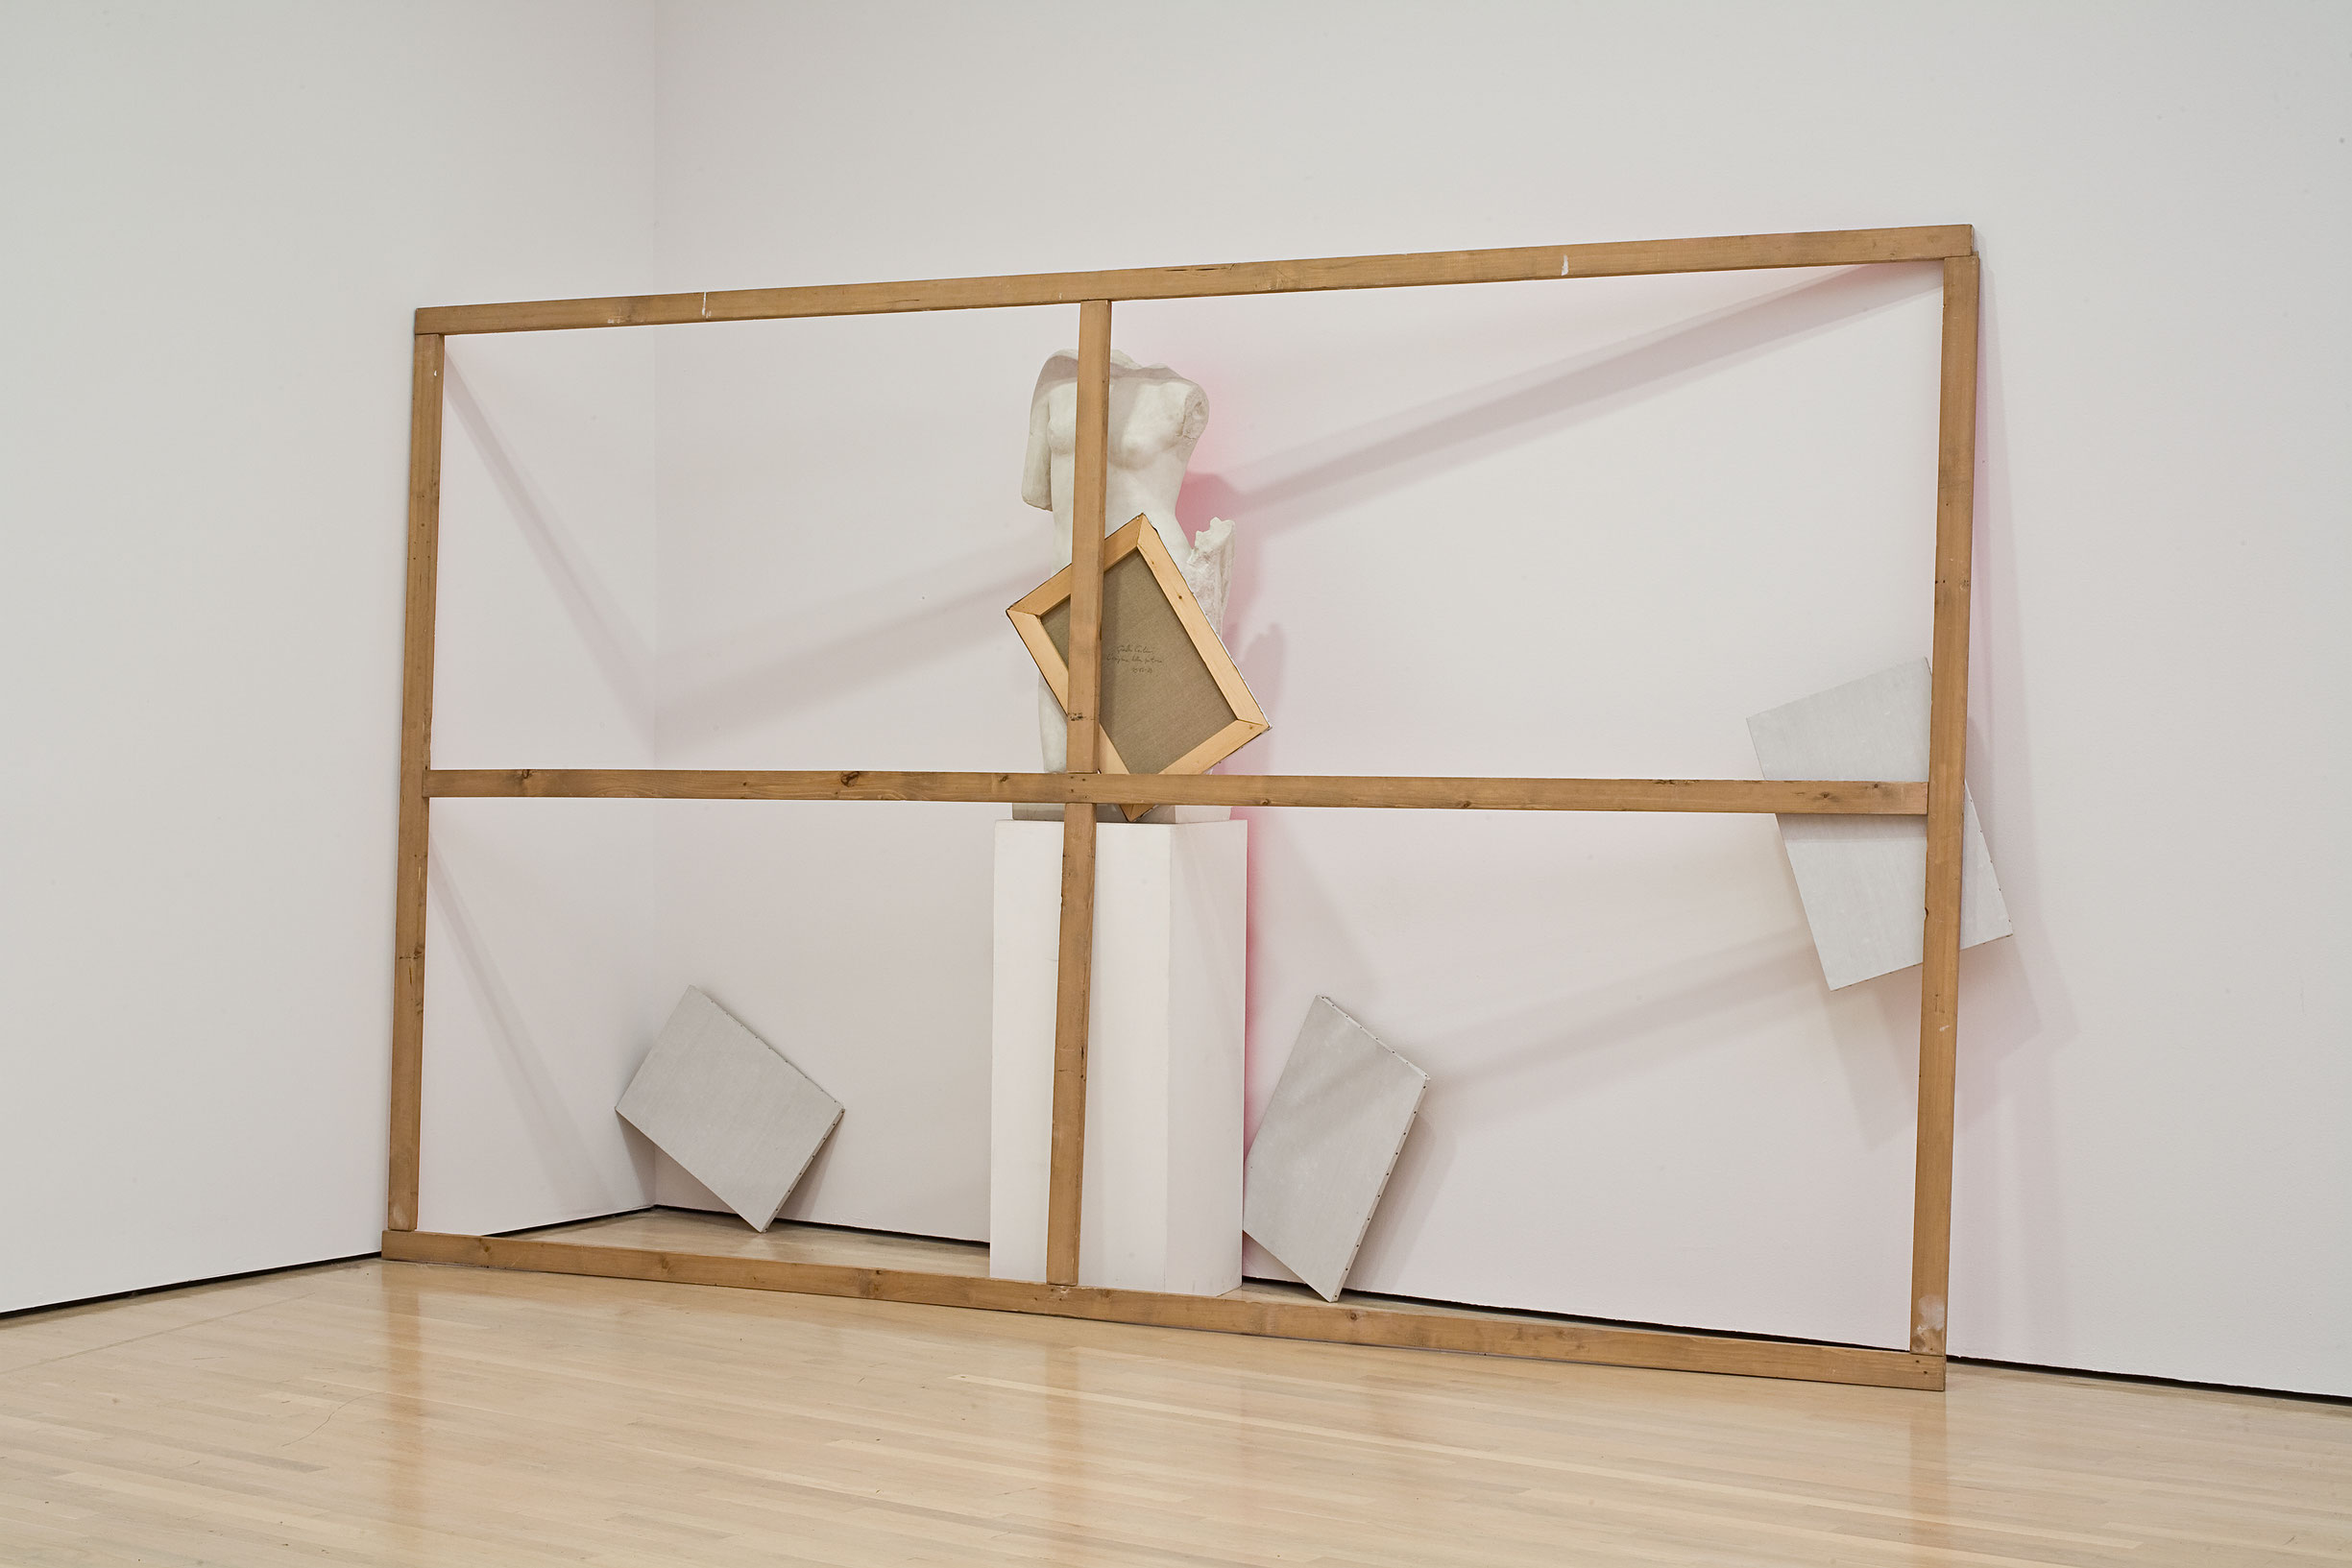 L’Origine della pittura, 1982-1983, Wooden stretcher, canvas mounted on stretchers, plaster mold on painted base and fluorescent paint.